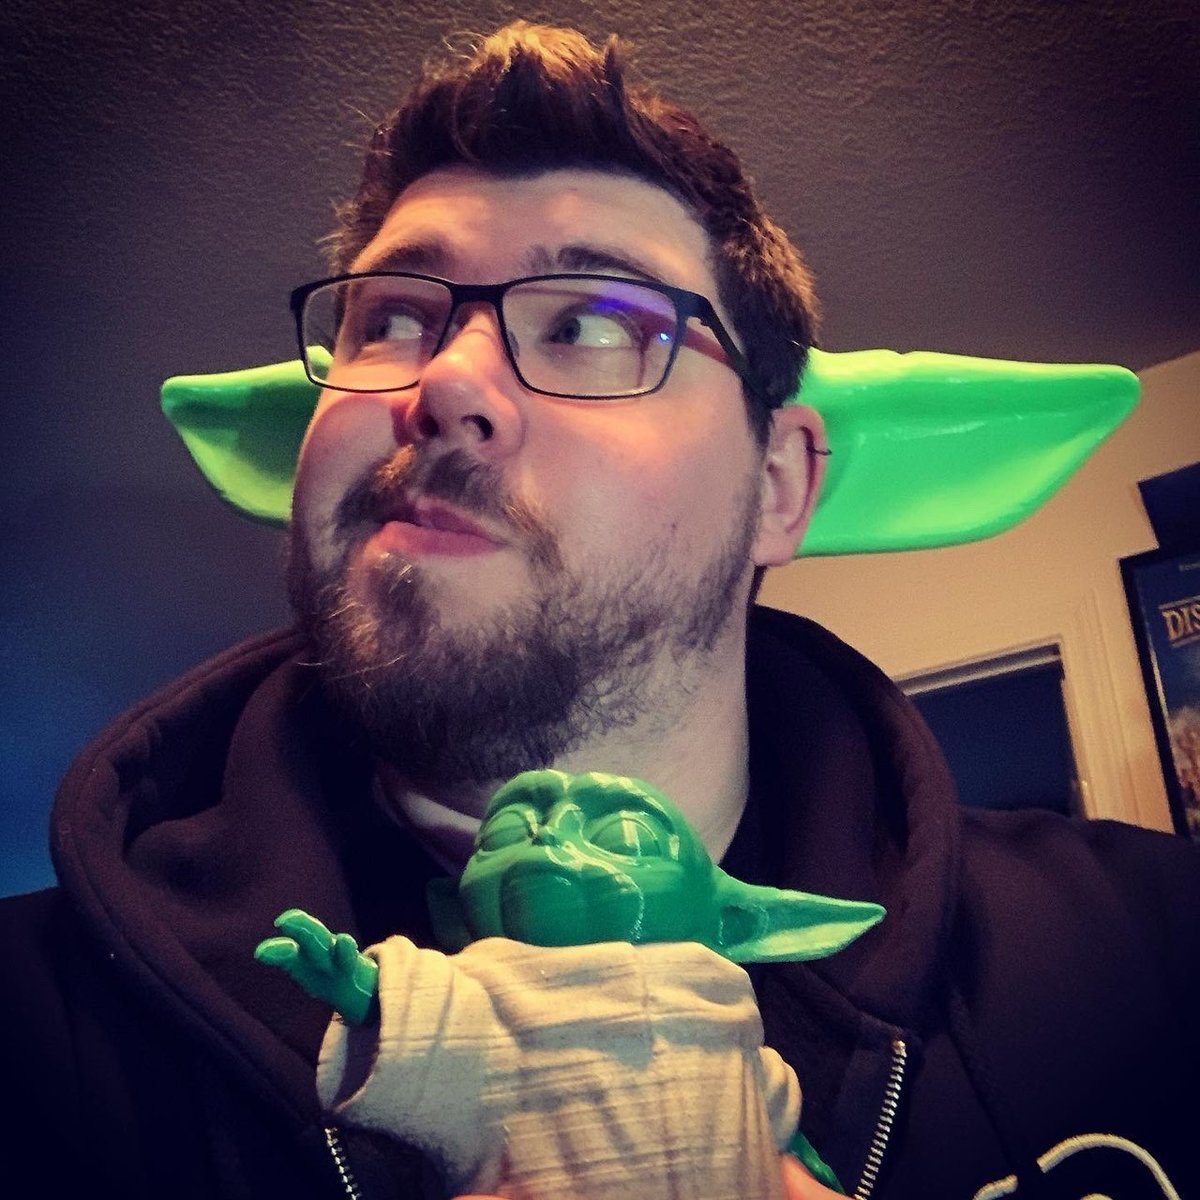 Channel your inner Baby Yoda!